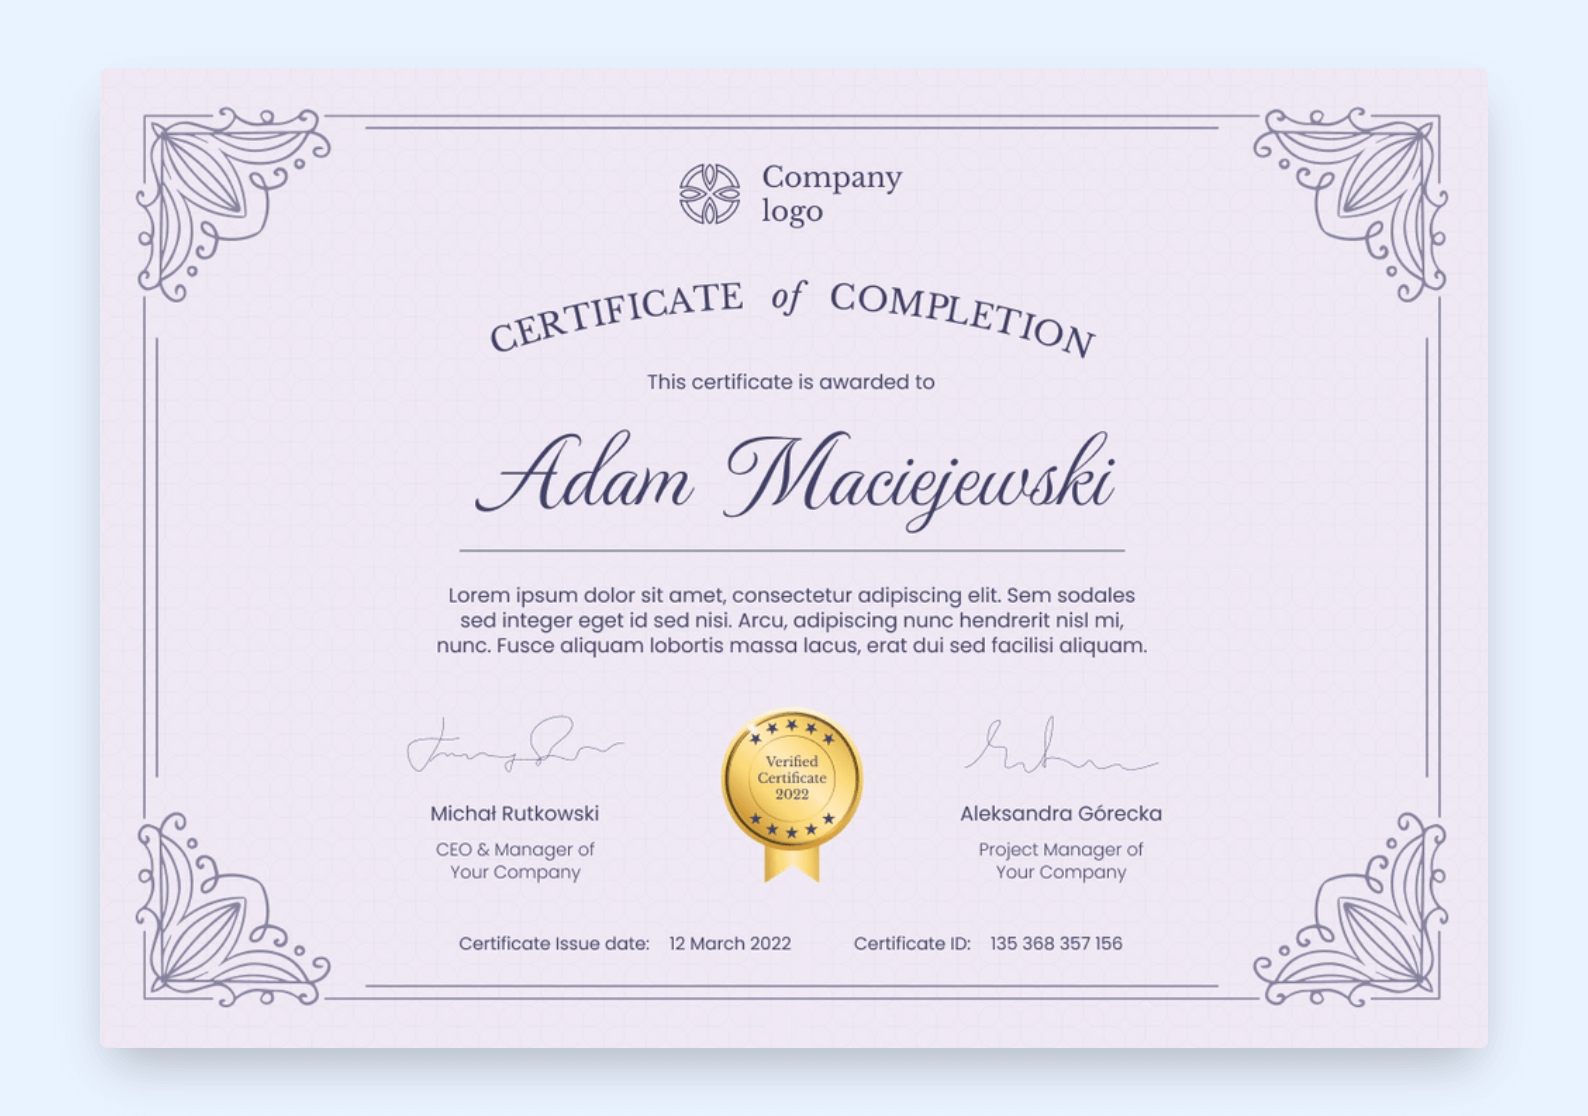 Traditional certificate of completion as a template for Google Slides.